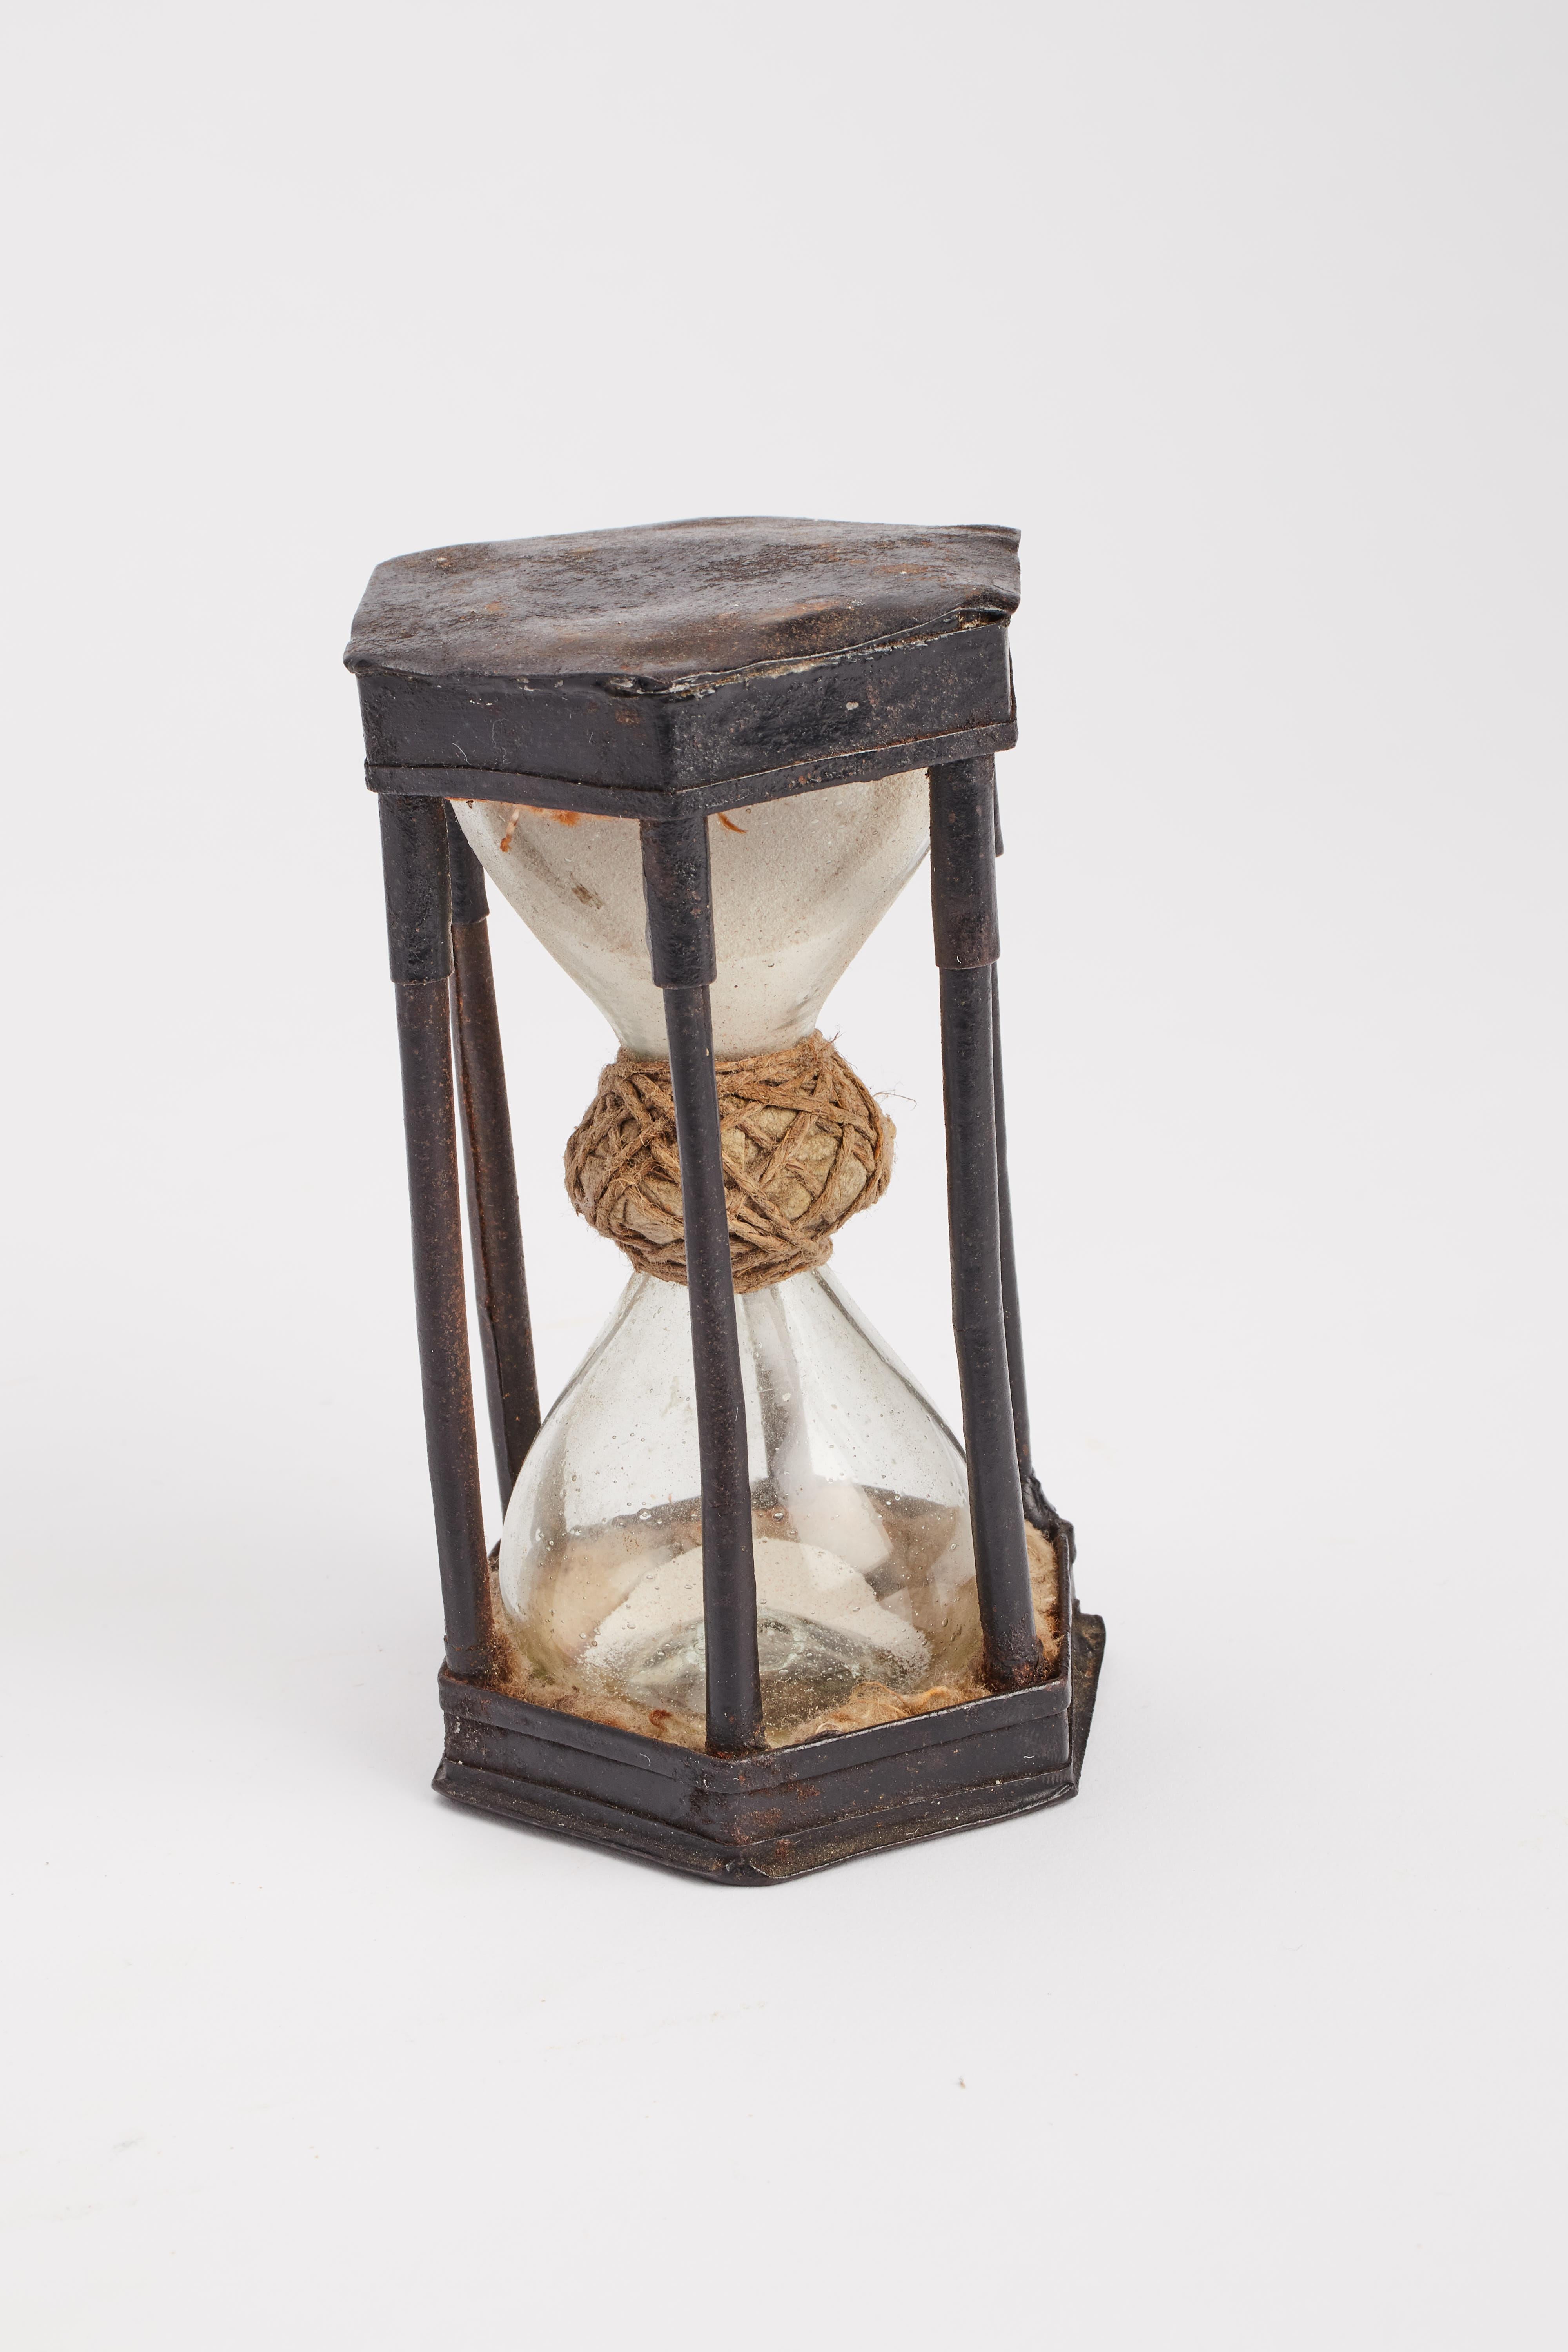 The hourglass cage displays hexagonal bases. Six smooth iron columns complete the cage. Inside the glass bulbs joined in the center by a ring of fabric and rope. Germany, early 1700s.